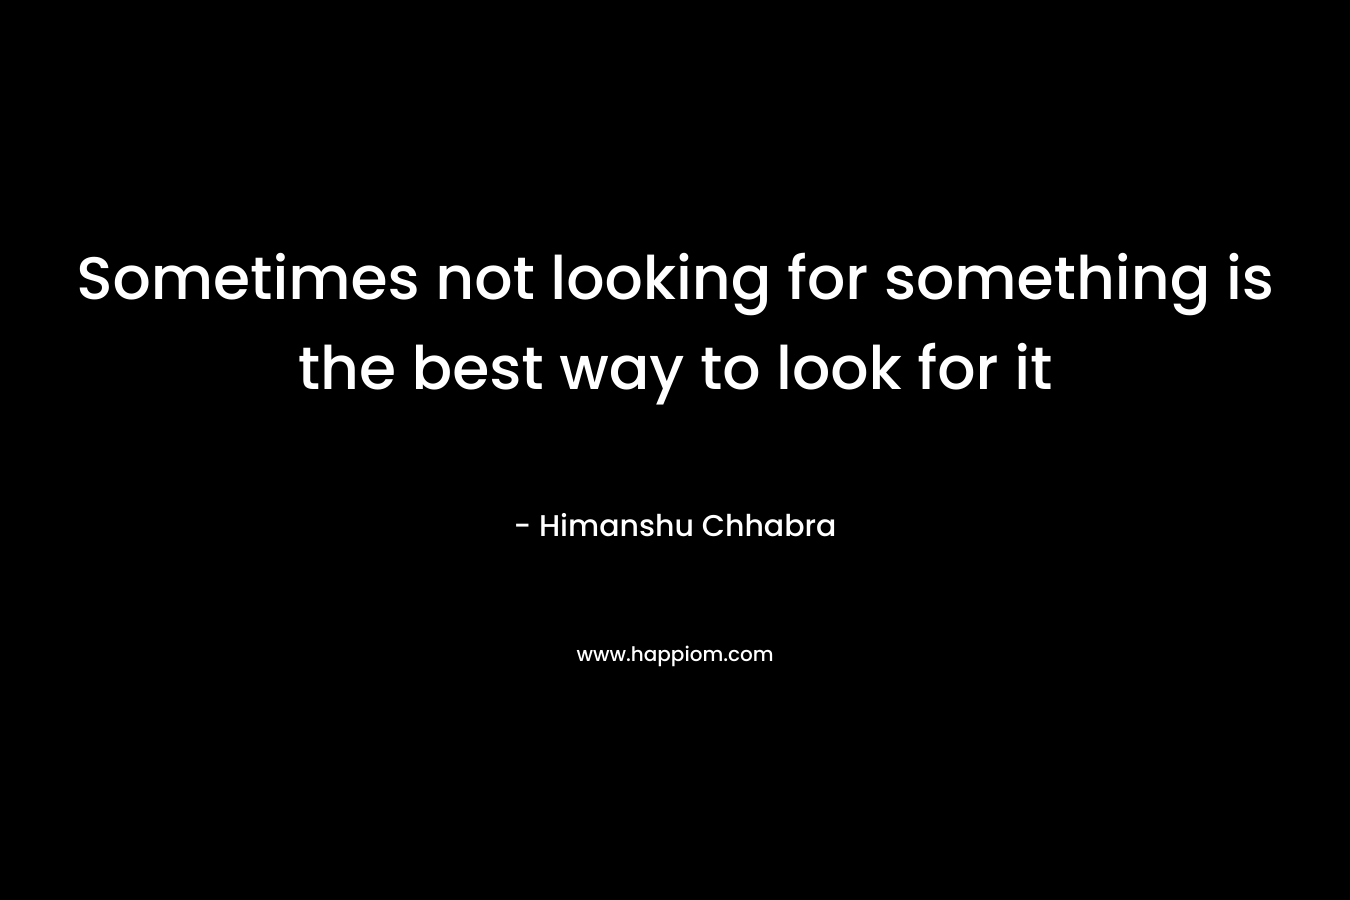 Sometimes not looking for something is the best way to look for it